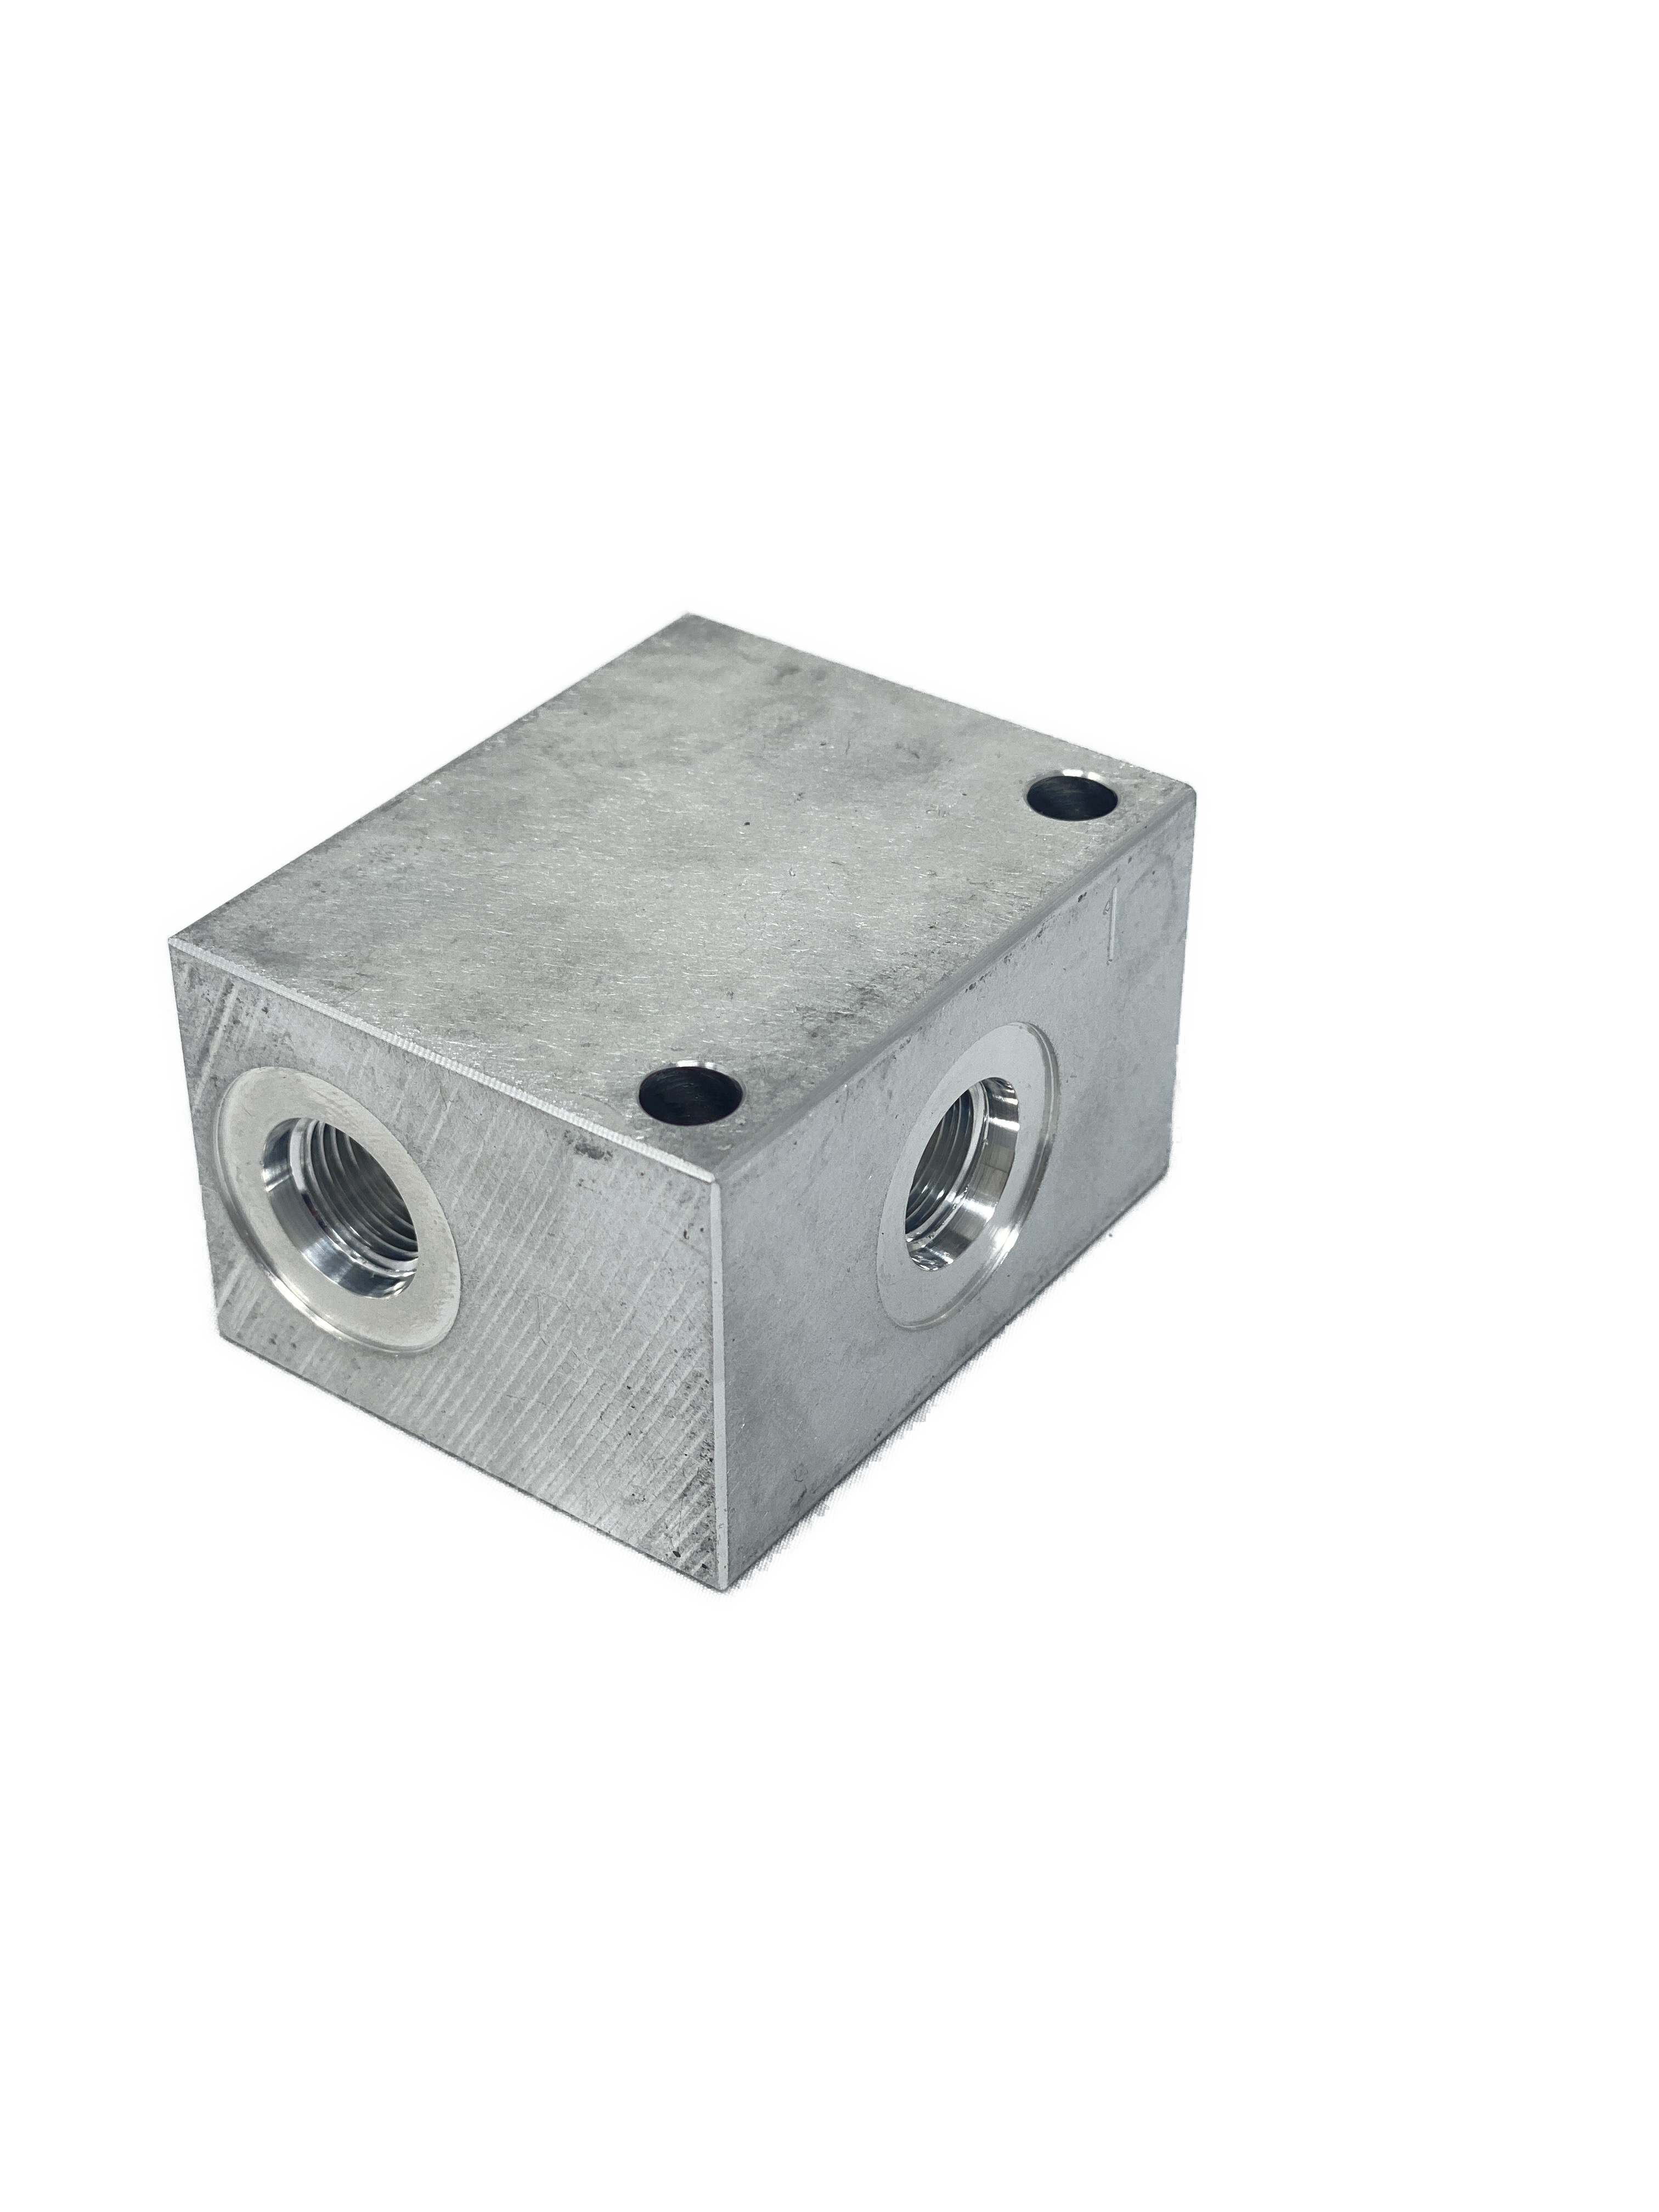 AC082CB6S : Daman Common Cavity Body, C-8-2 Cartridge Cavity, #6 SAE (3/8") Port Connections, 3000psi Rated, Aluminum, Without Gauge Port